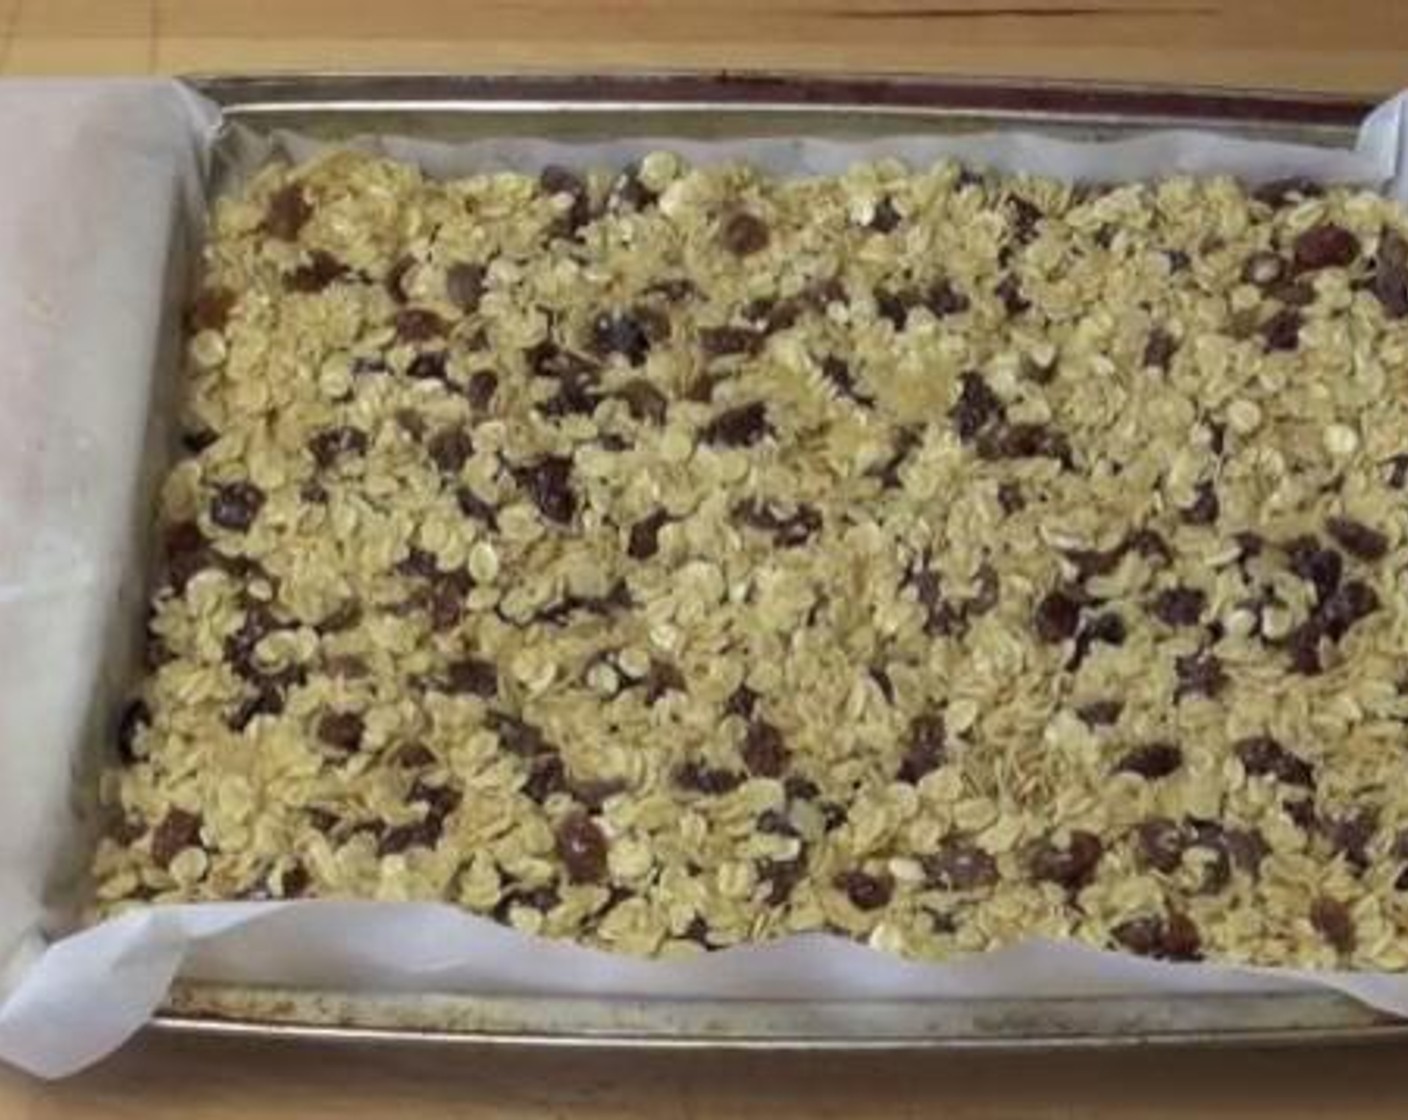 step 2 In a baking tray lined with baking paper, transfer the oats mixture. Bake inside a preheated oven, at 180 degrees C (350 degrees F) for about 15 minutes.